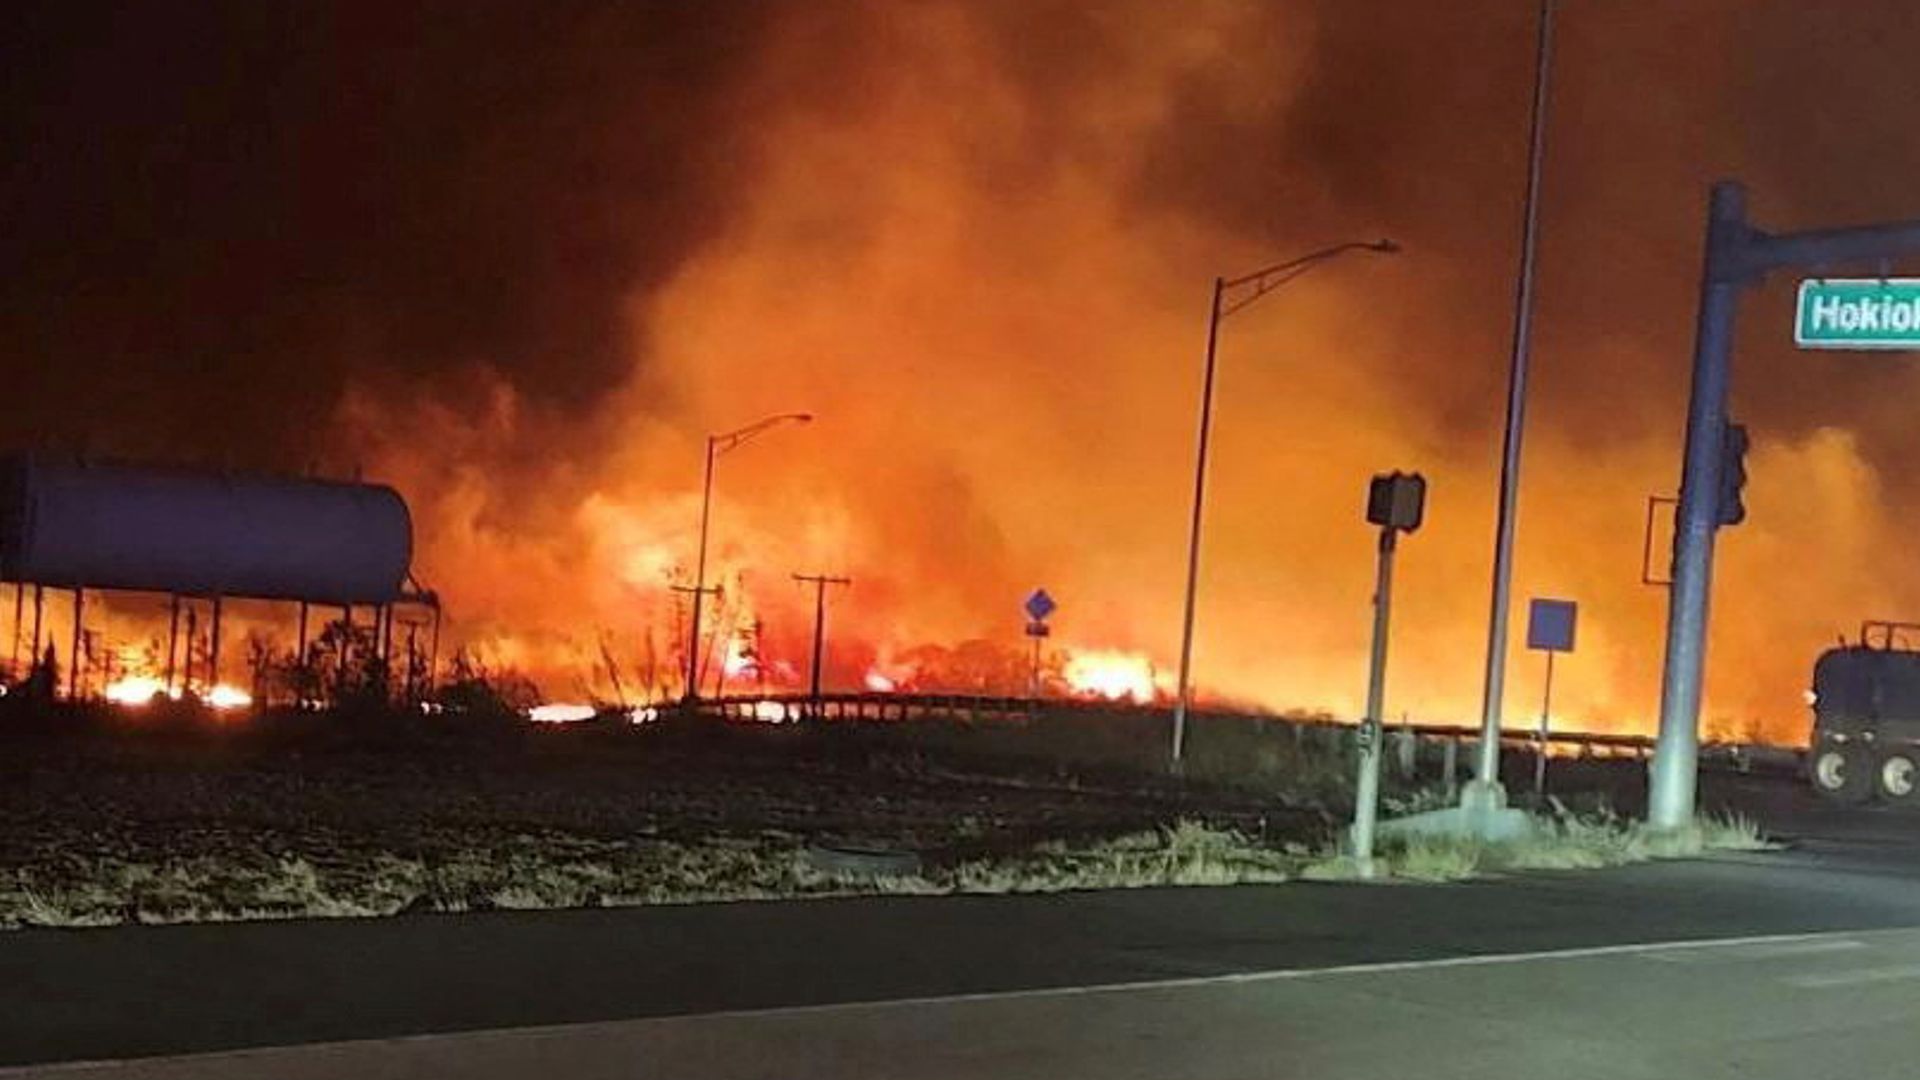 The death toll rises after wildfires tear through parts of Hawaii.